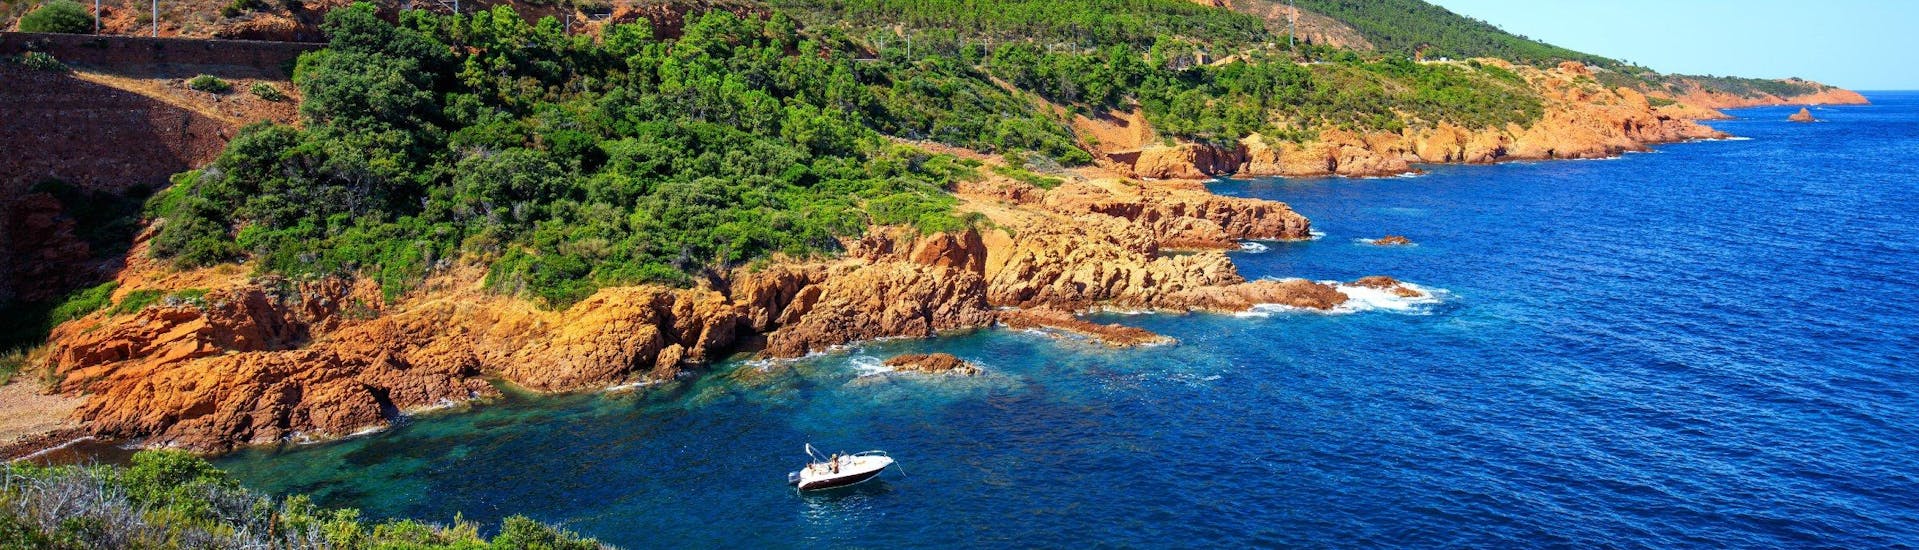 A boat is cruising along the coastline of the L'Estérel Natural Park, which is a popular destination for boat trips from Cannes.